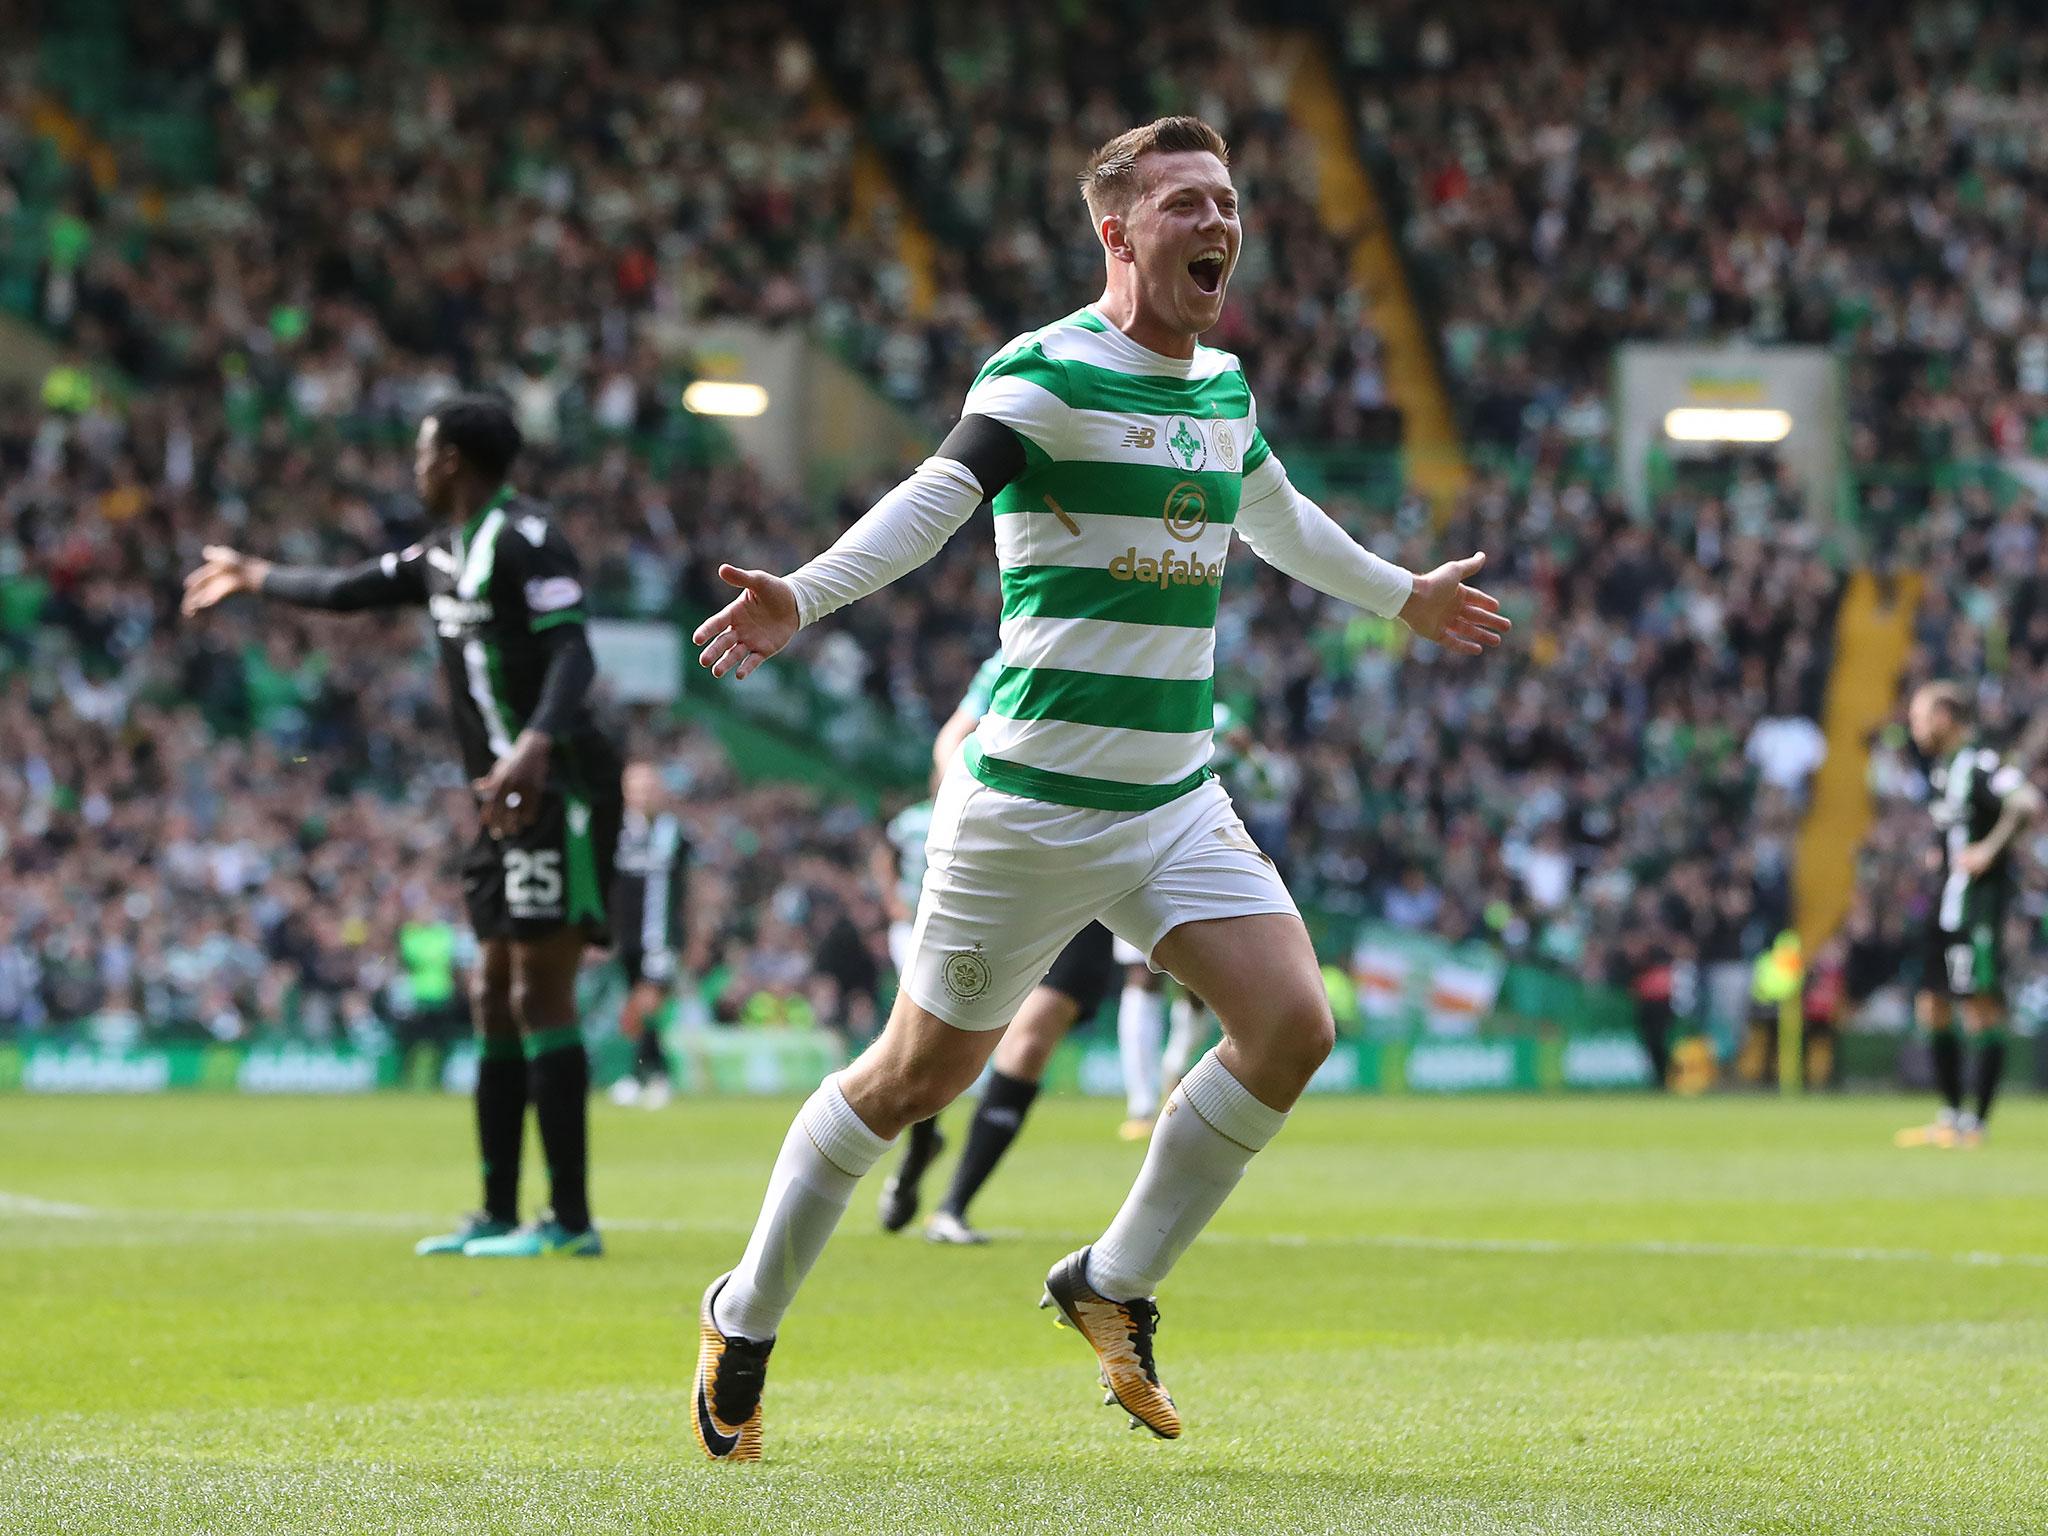 Callum McGregor netted a double for Celtic in their recent 2-2 draw with Hibernian